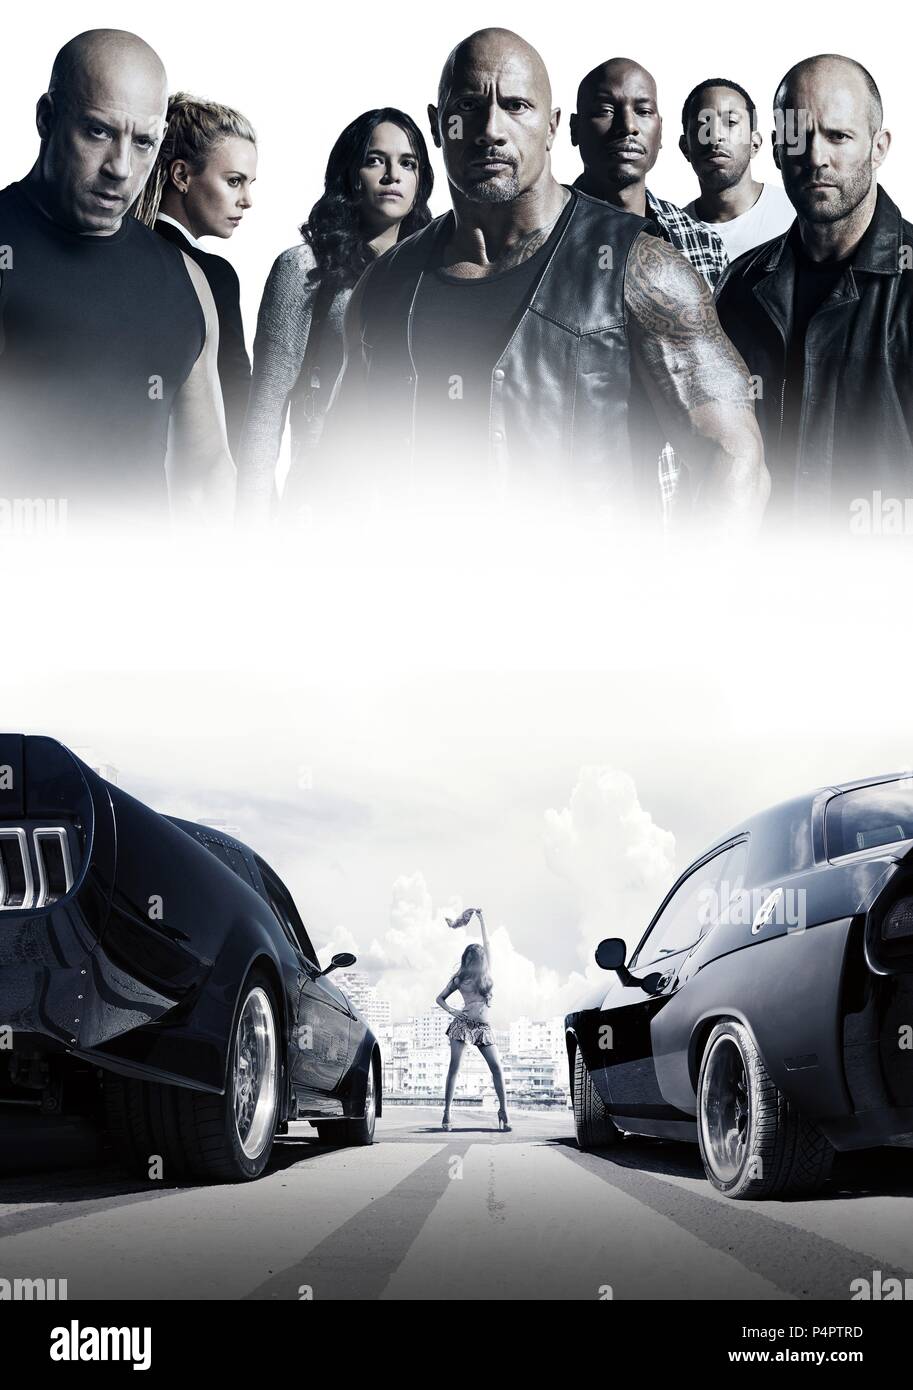 Original Film Title: FAST & FURIOUS 8. English Title: FAST & FURIOUS 8.  Film Director: F. GARY GRAY. Year: 2017. Stars: CHARLIZE THERON; LUDACRIS;  THE ROCK; VIN DIESEL; MICHELLE RODRIGUEZ; JASON STATHAM;